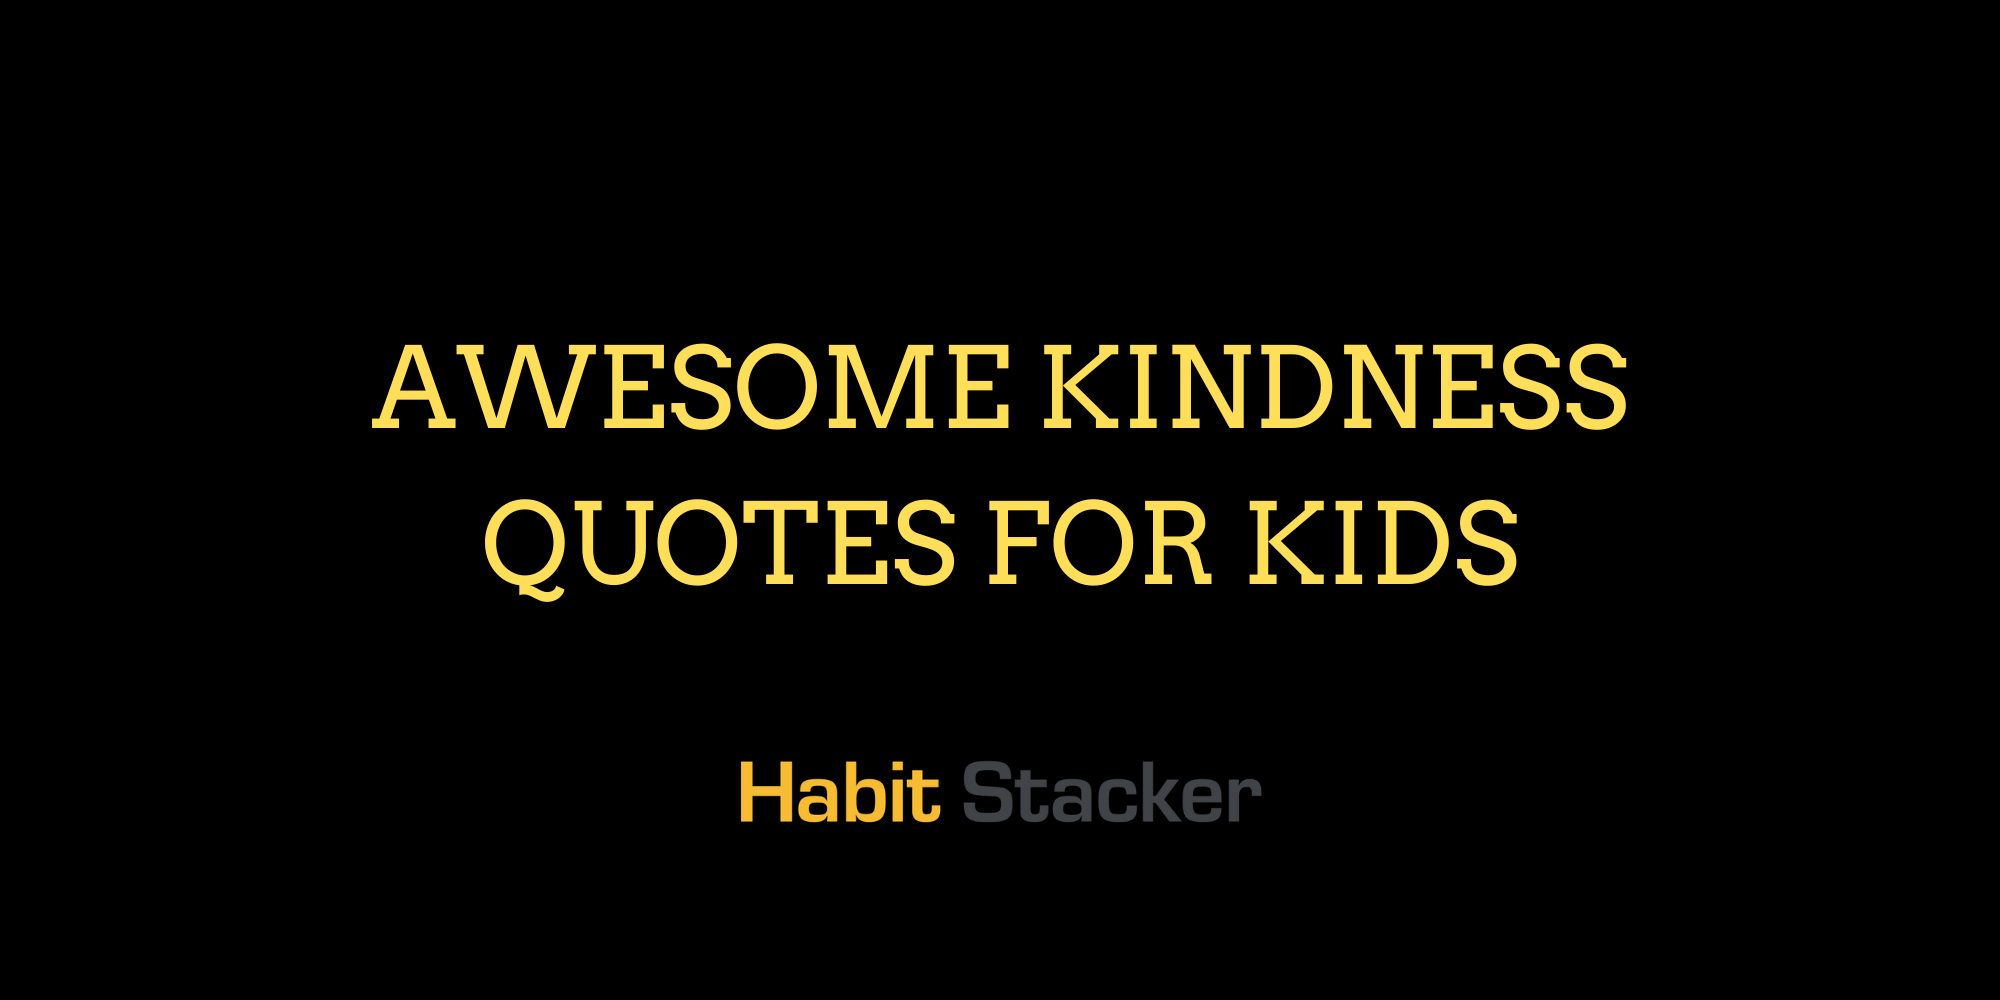 28 Awesome Kindness Quotes for Kids | Habit Stacker